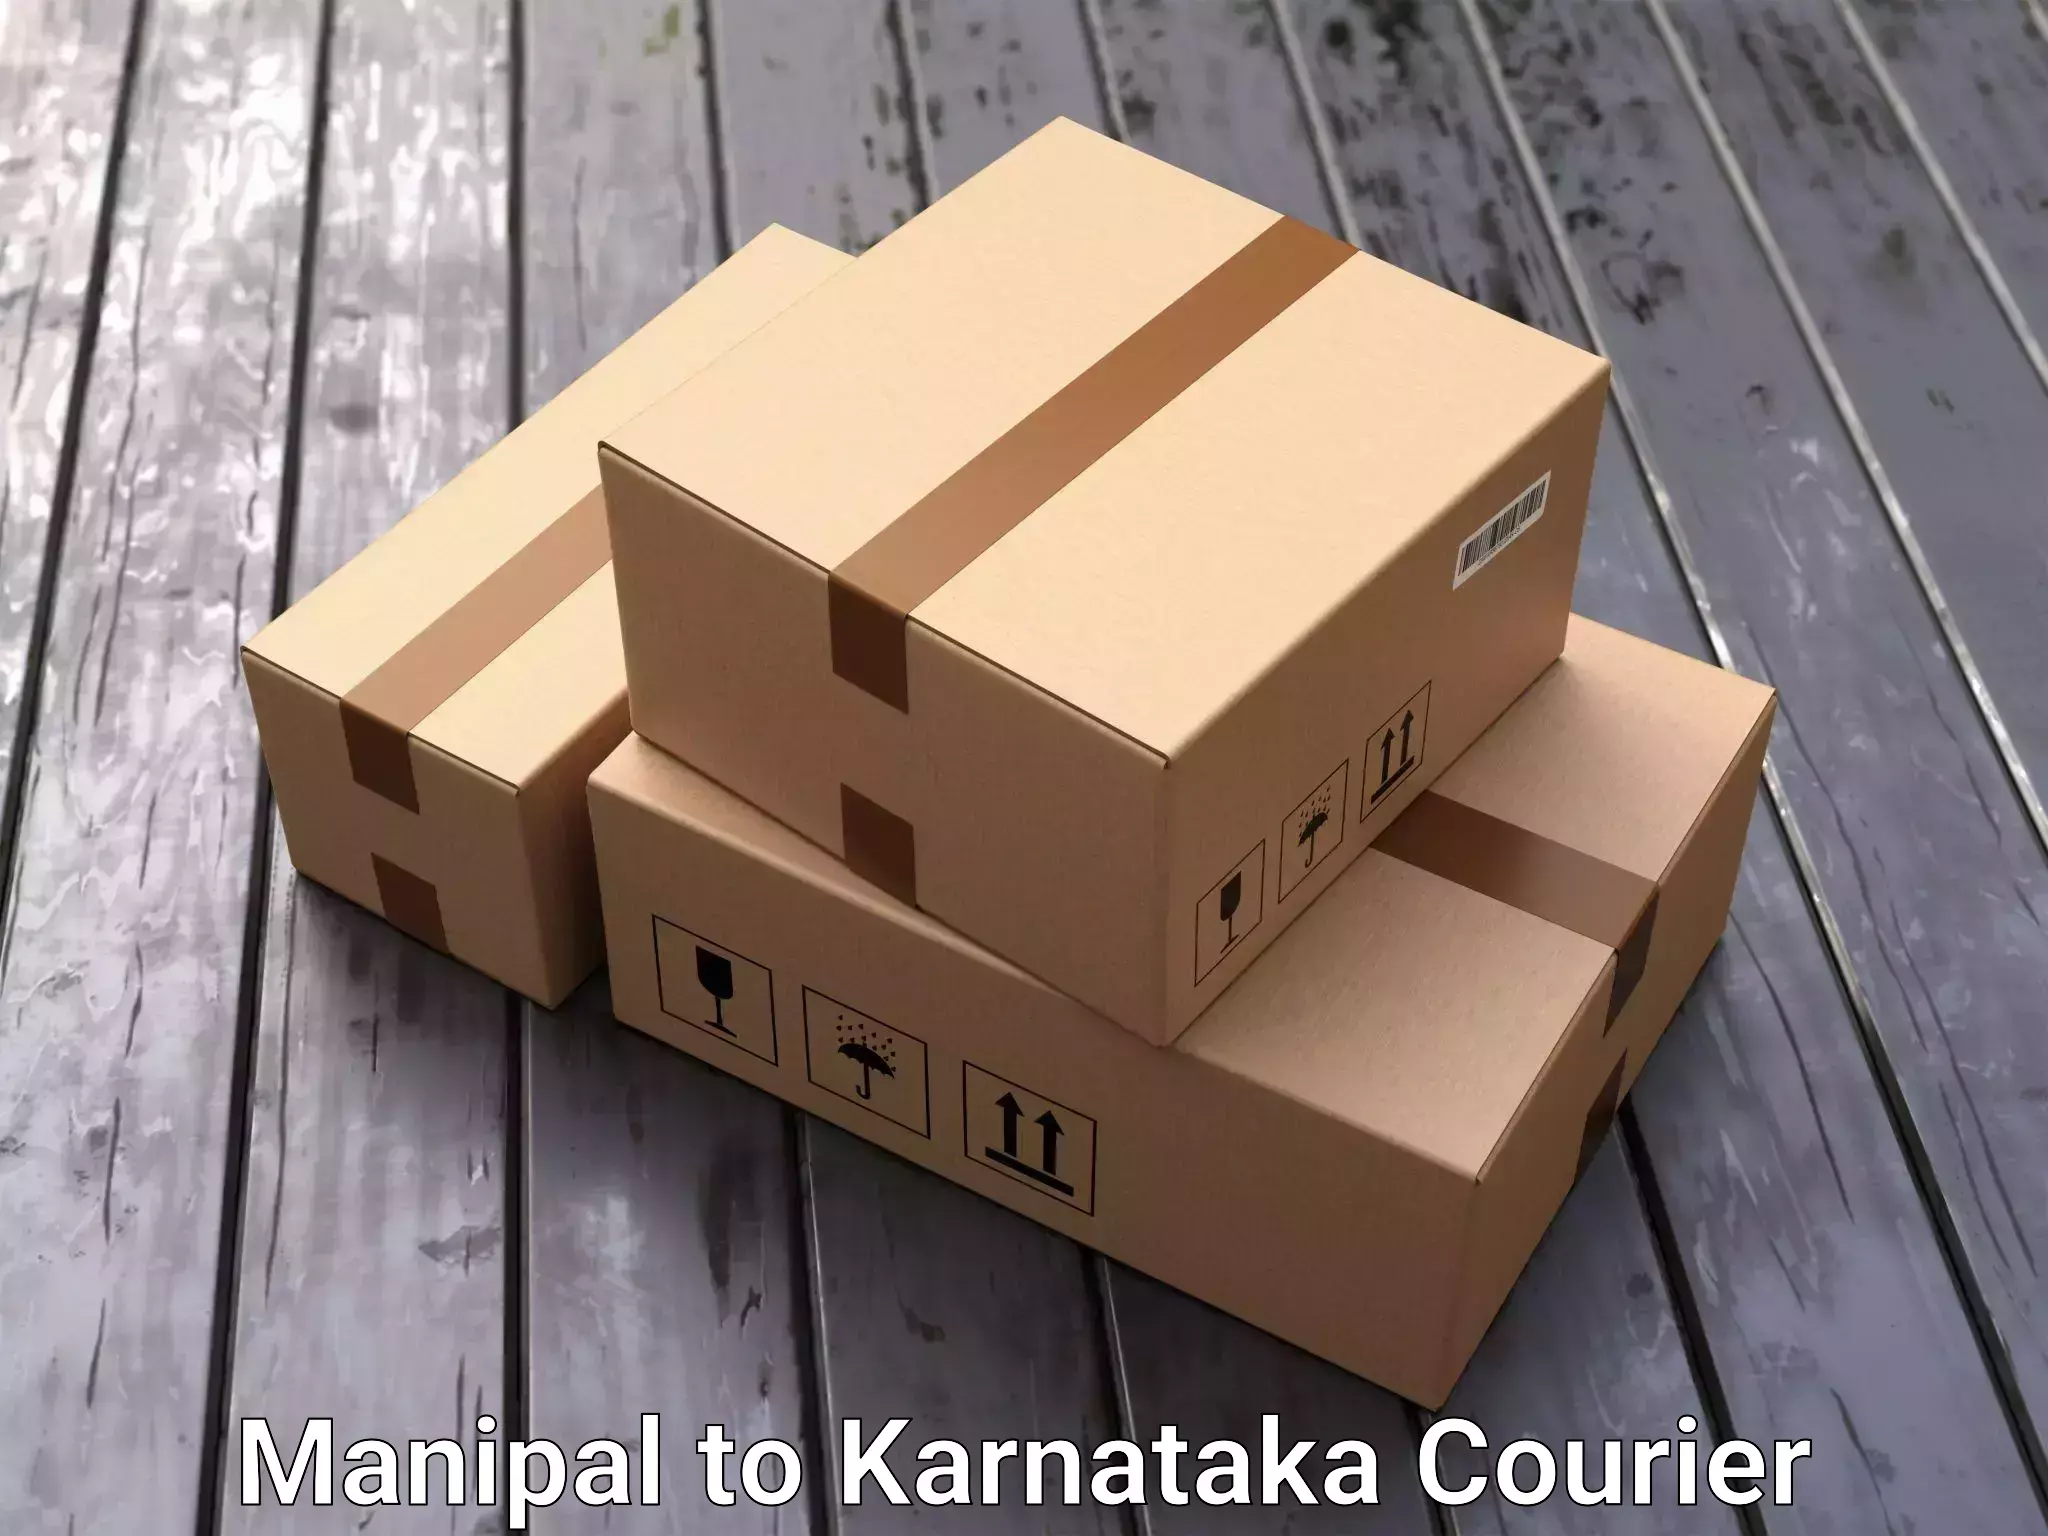 Moving and packing experts in Manipal to Bengaluru